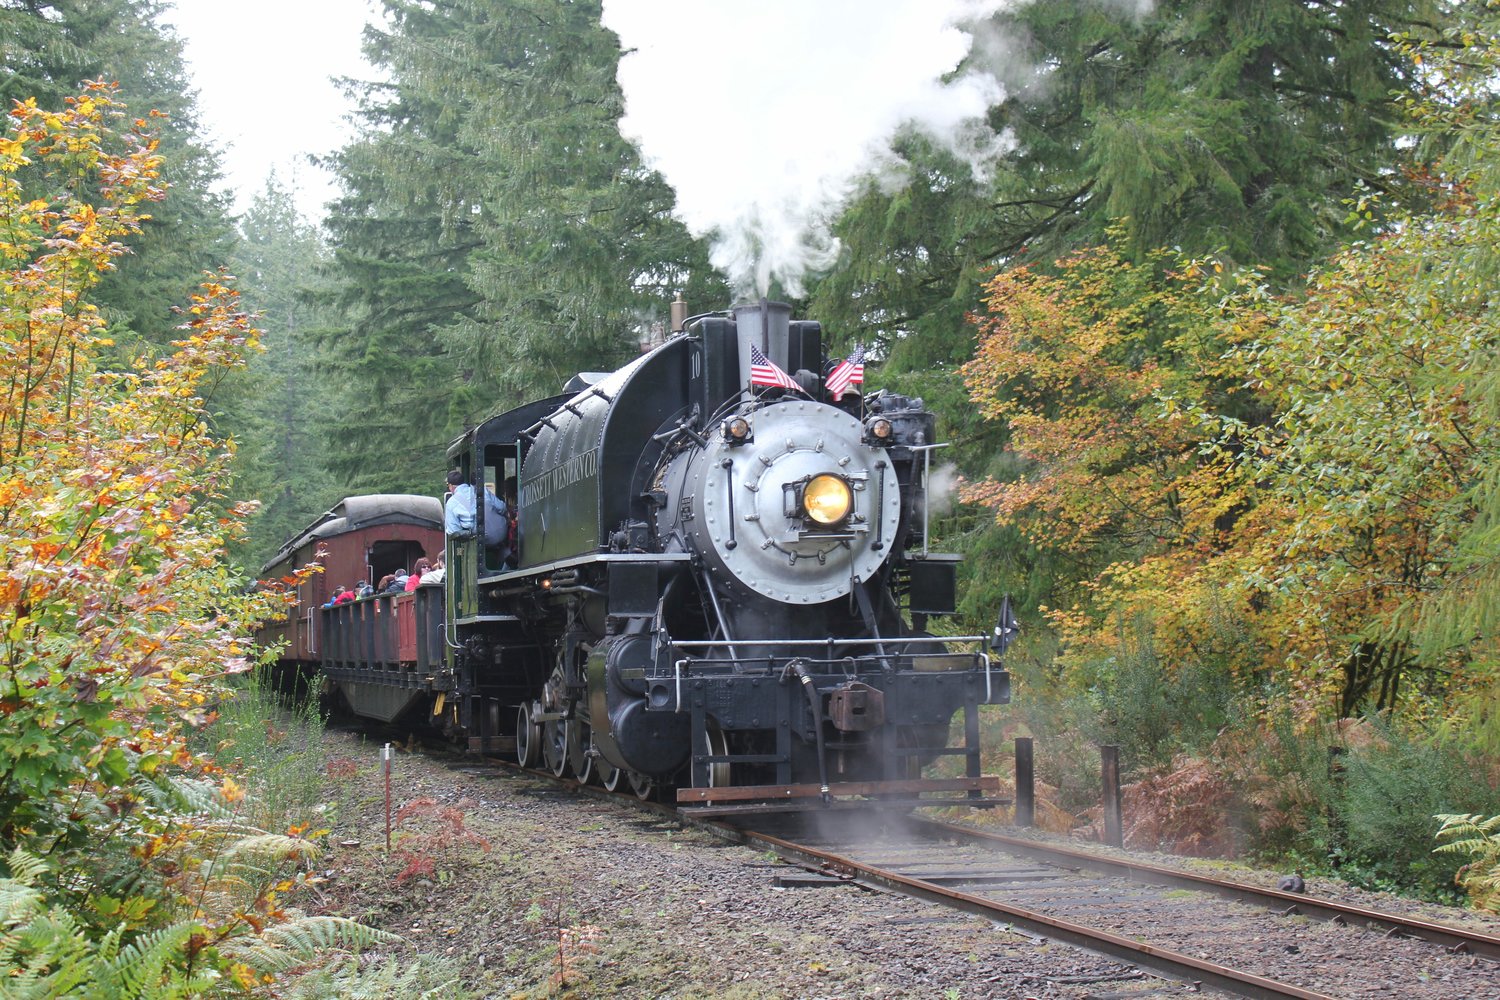 In addition to the steam engine, the railroad operates a diesel engine on other rides throughout the year.